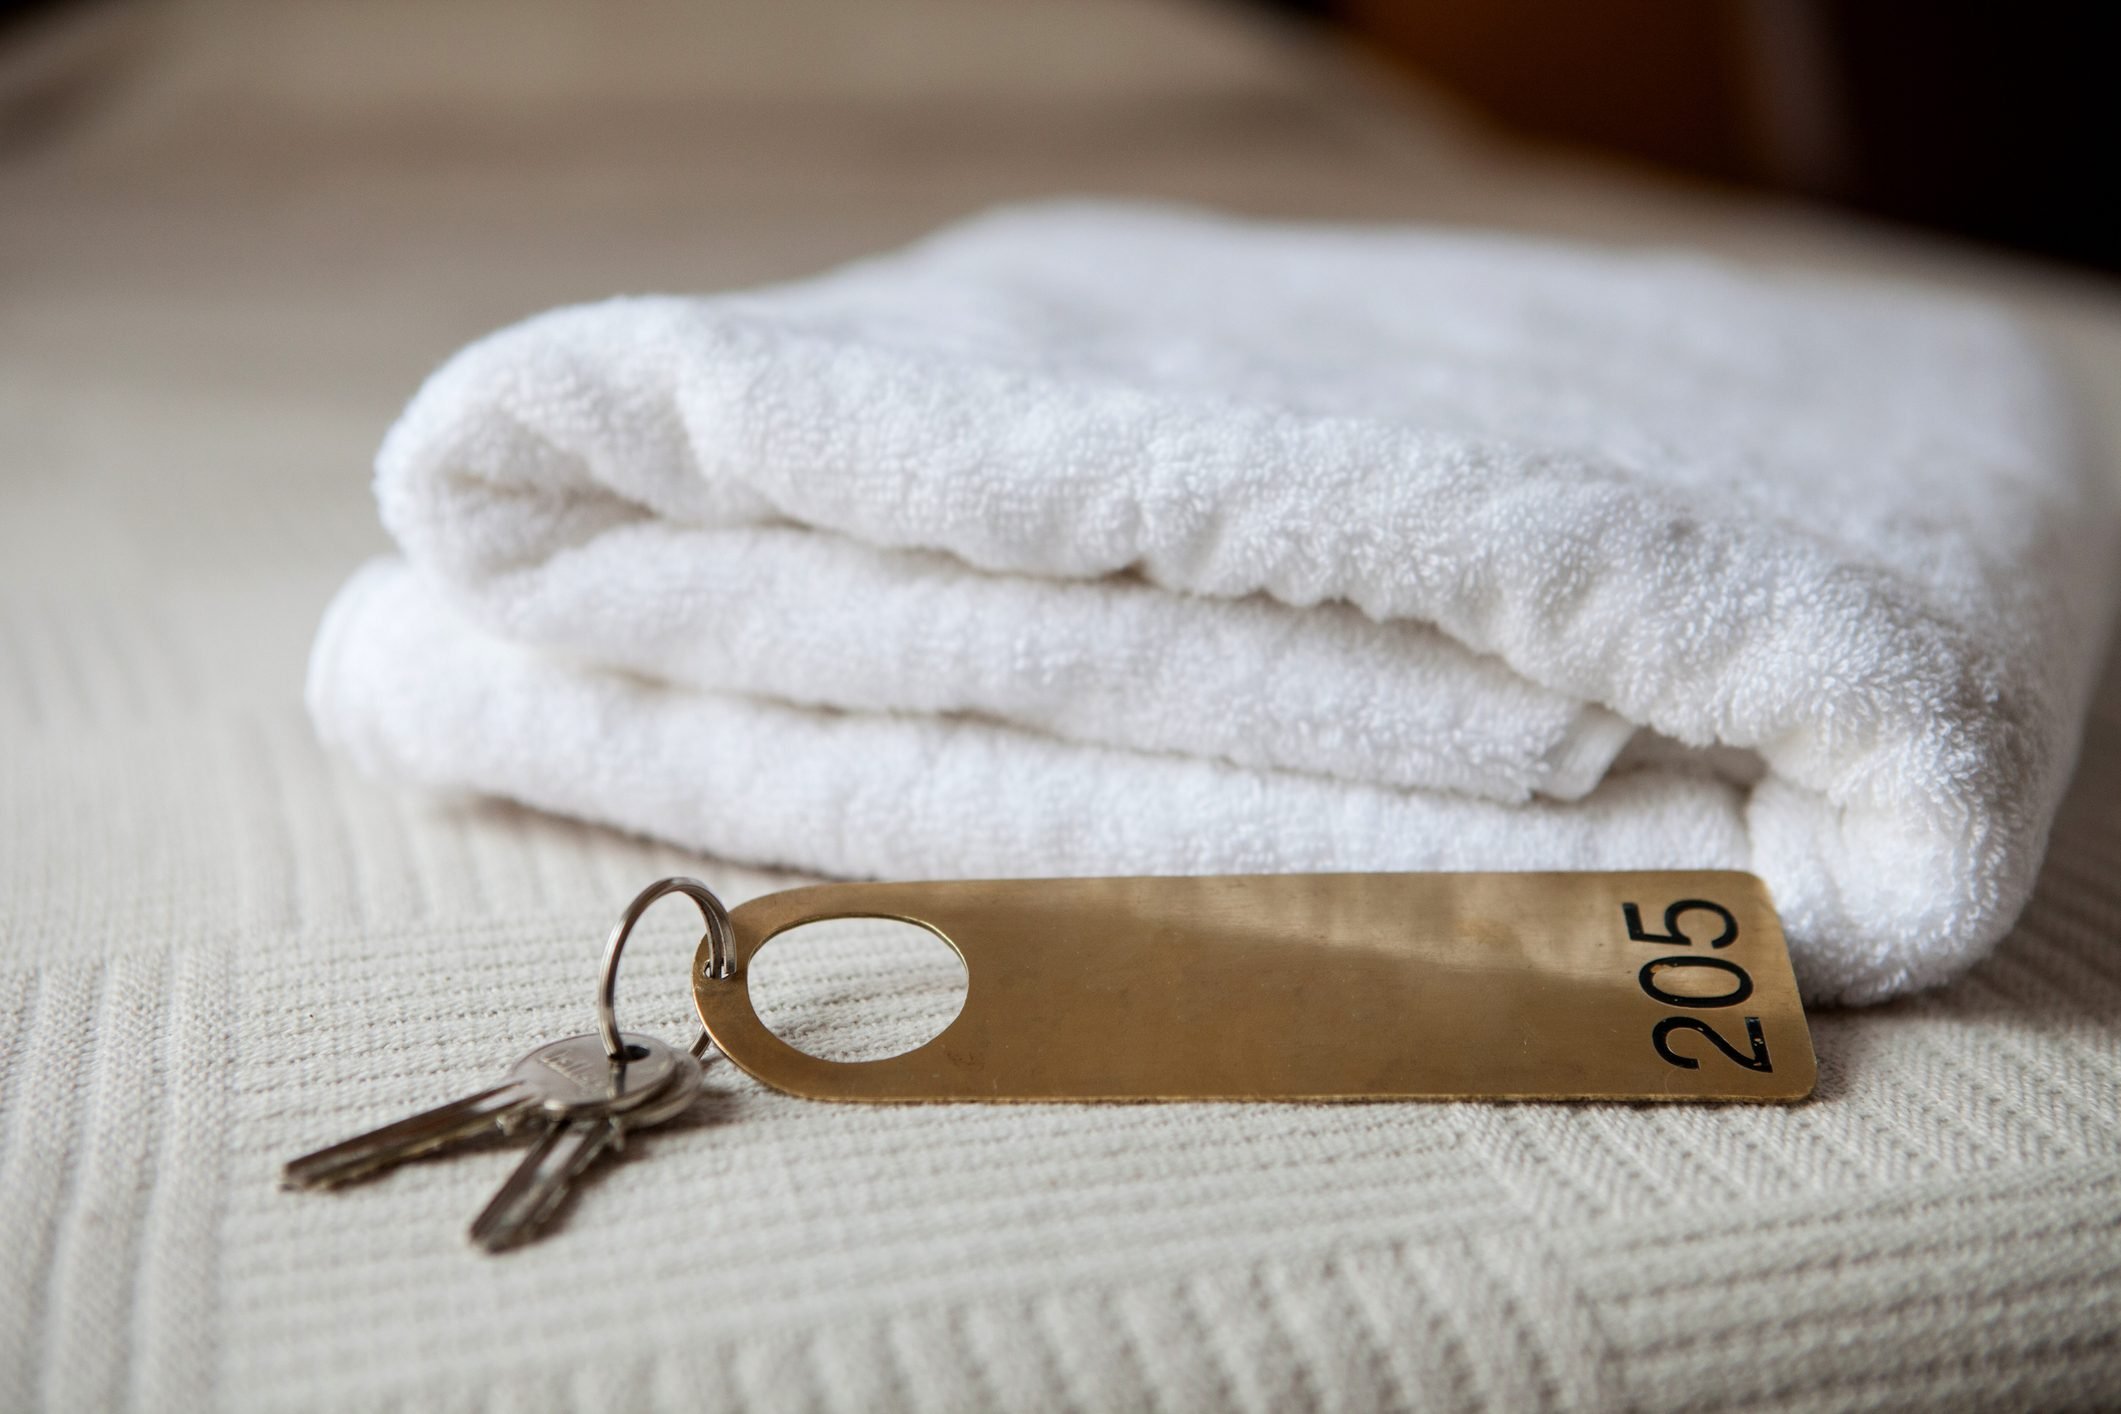 Here's Why You Should Leave a Towel By Your Hotel Room Door